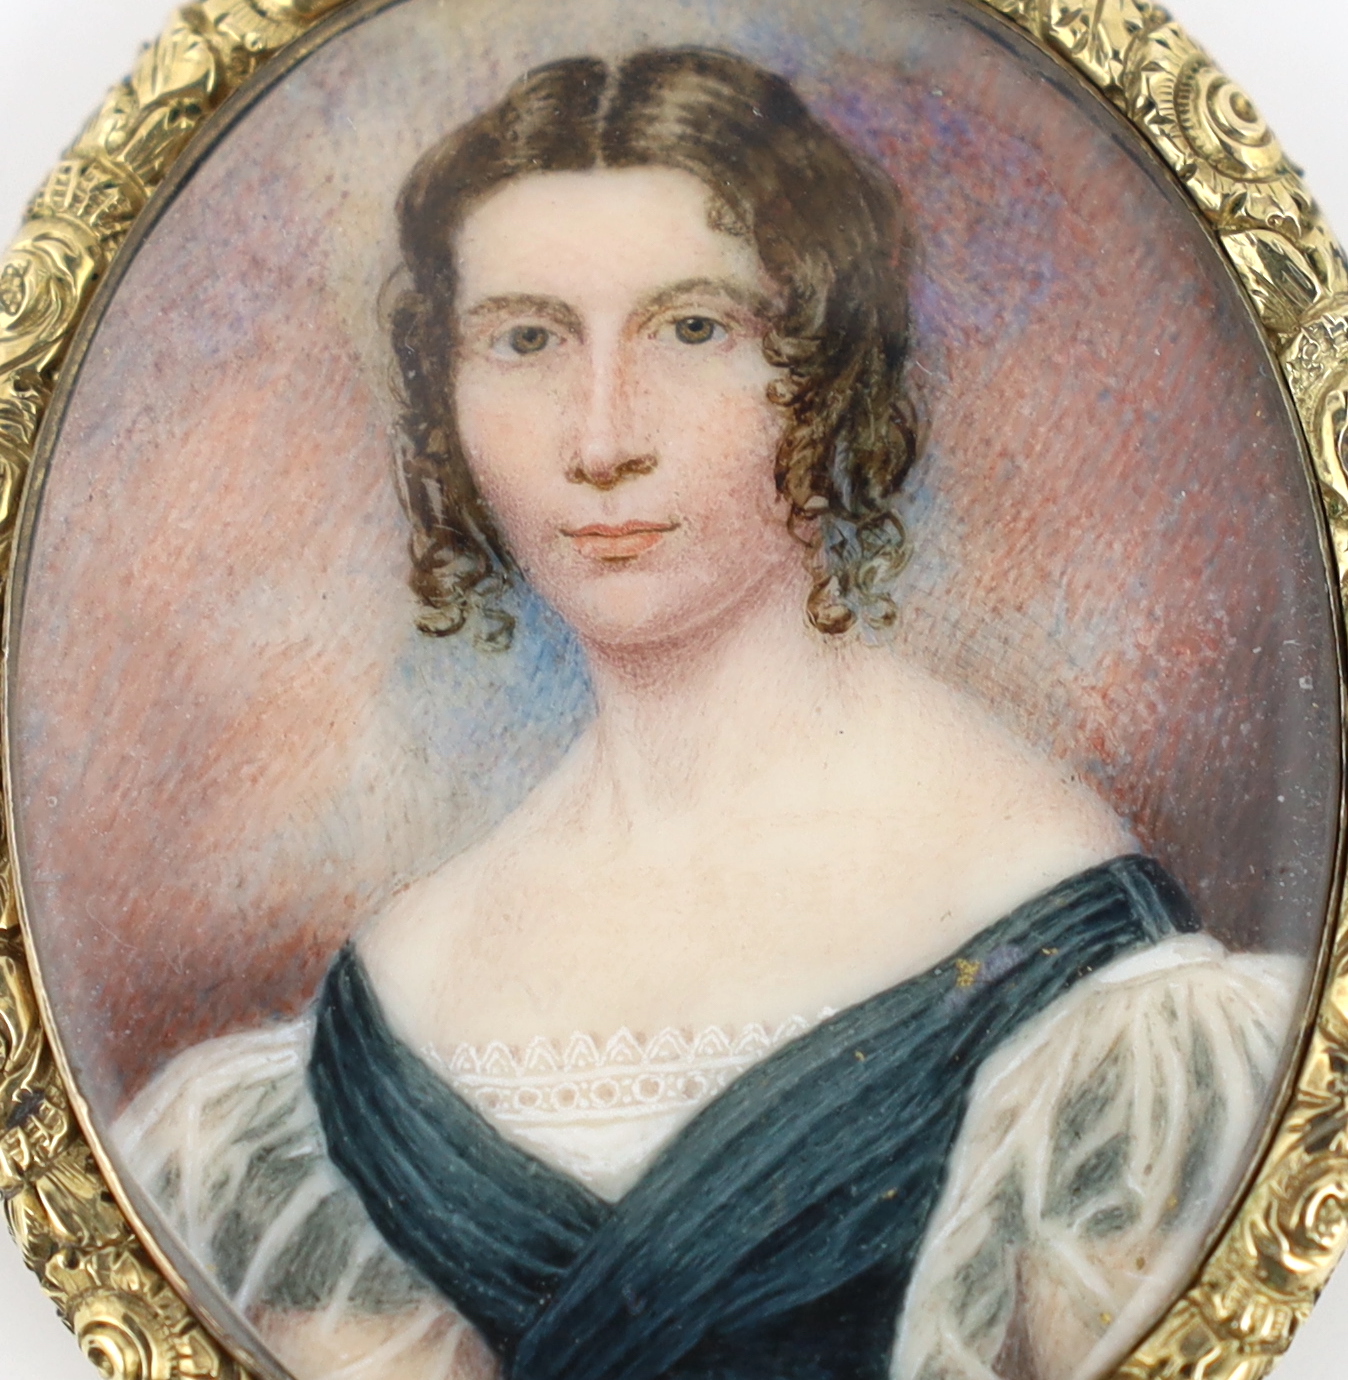 Peter Paillou Jnr (British, 1757-c.1832), Portrait miniature of a lady, watercolour on ivory, 4.2 x 3.4cm. CITES Submission reference LL3ARL8P